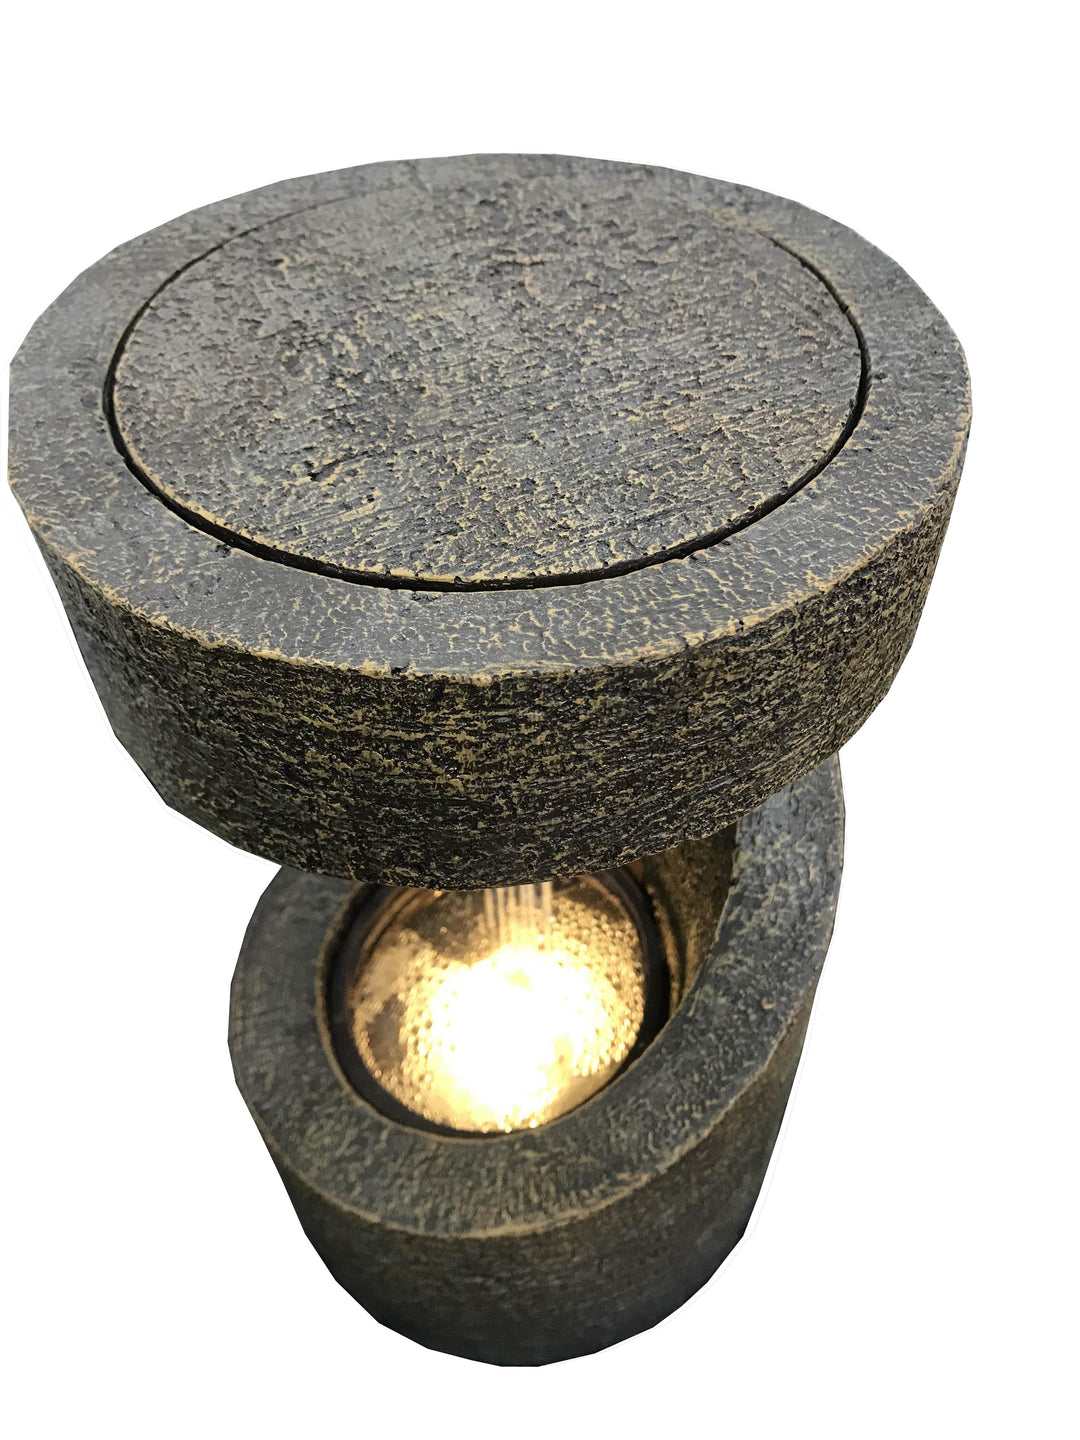 Wooden LED fountain - Water resistant HI-LINE GIFT LTD.